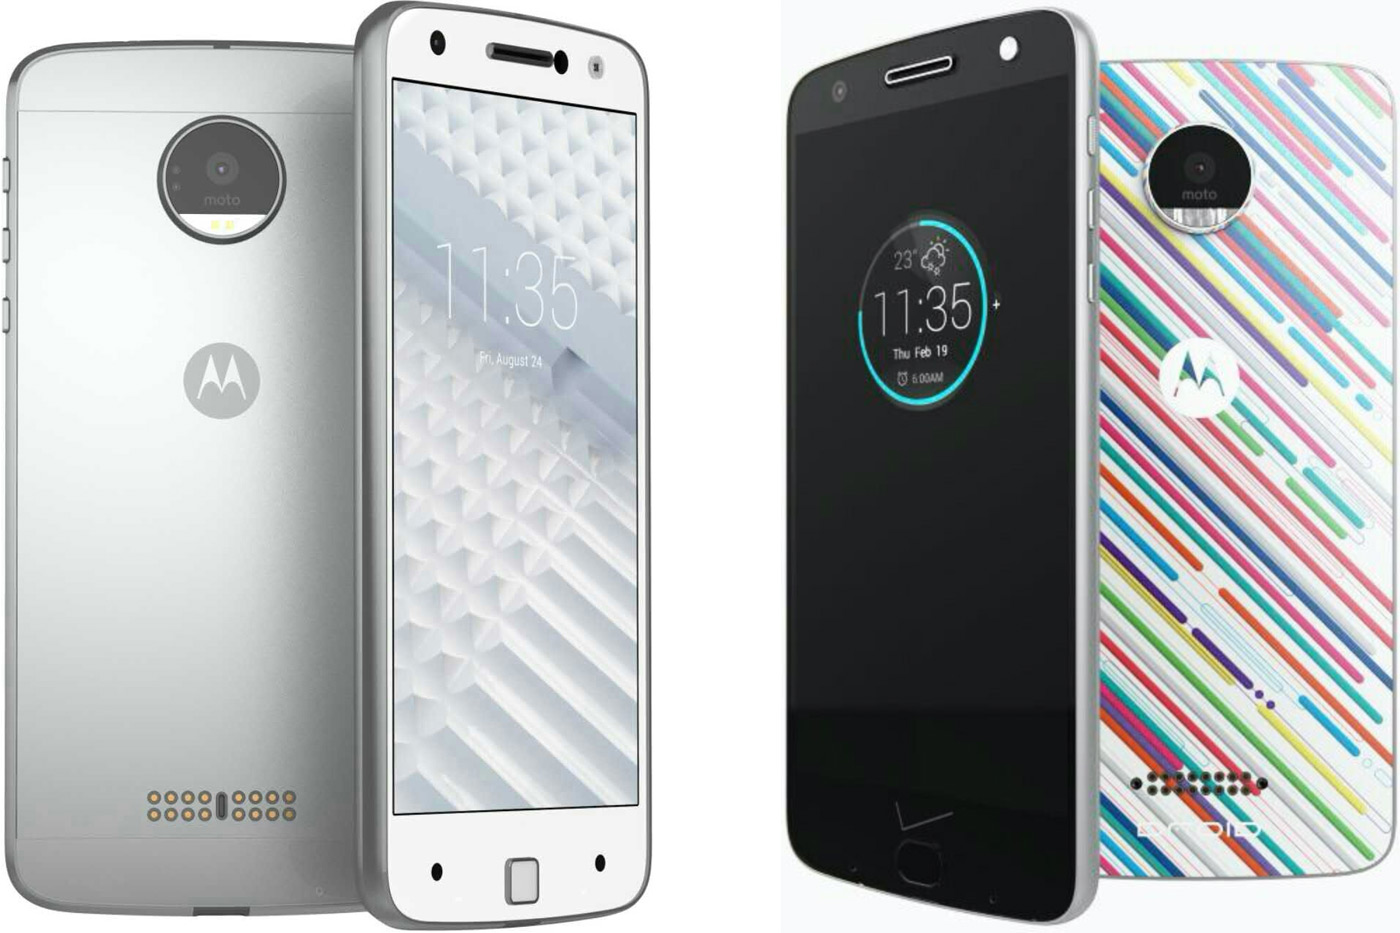 The next Moto X may pack a smarter, metal-clad design